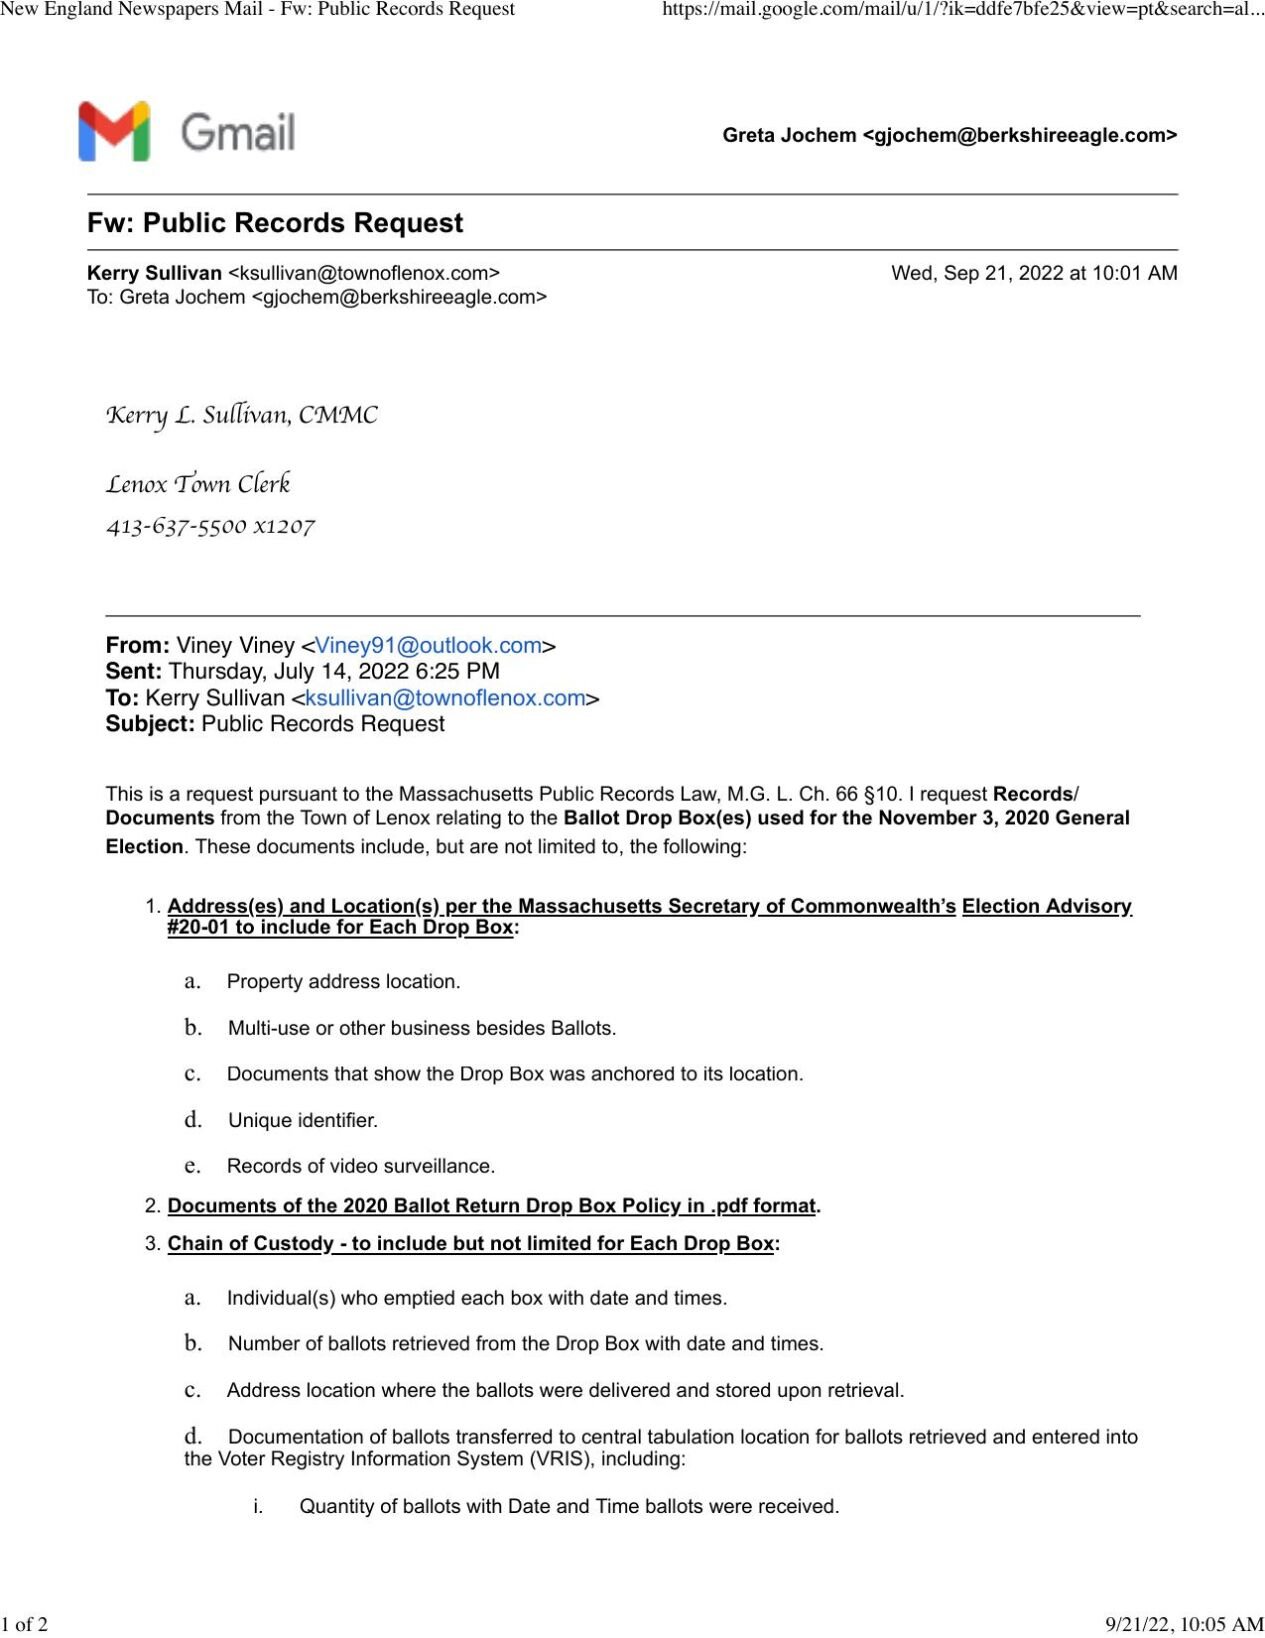 Emailed public record request to lenox town clerk